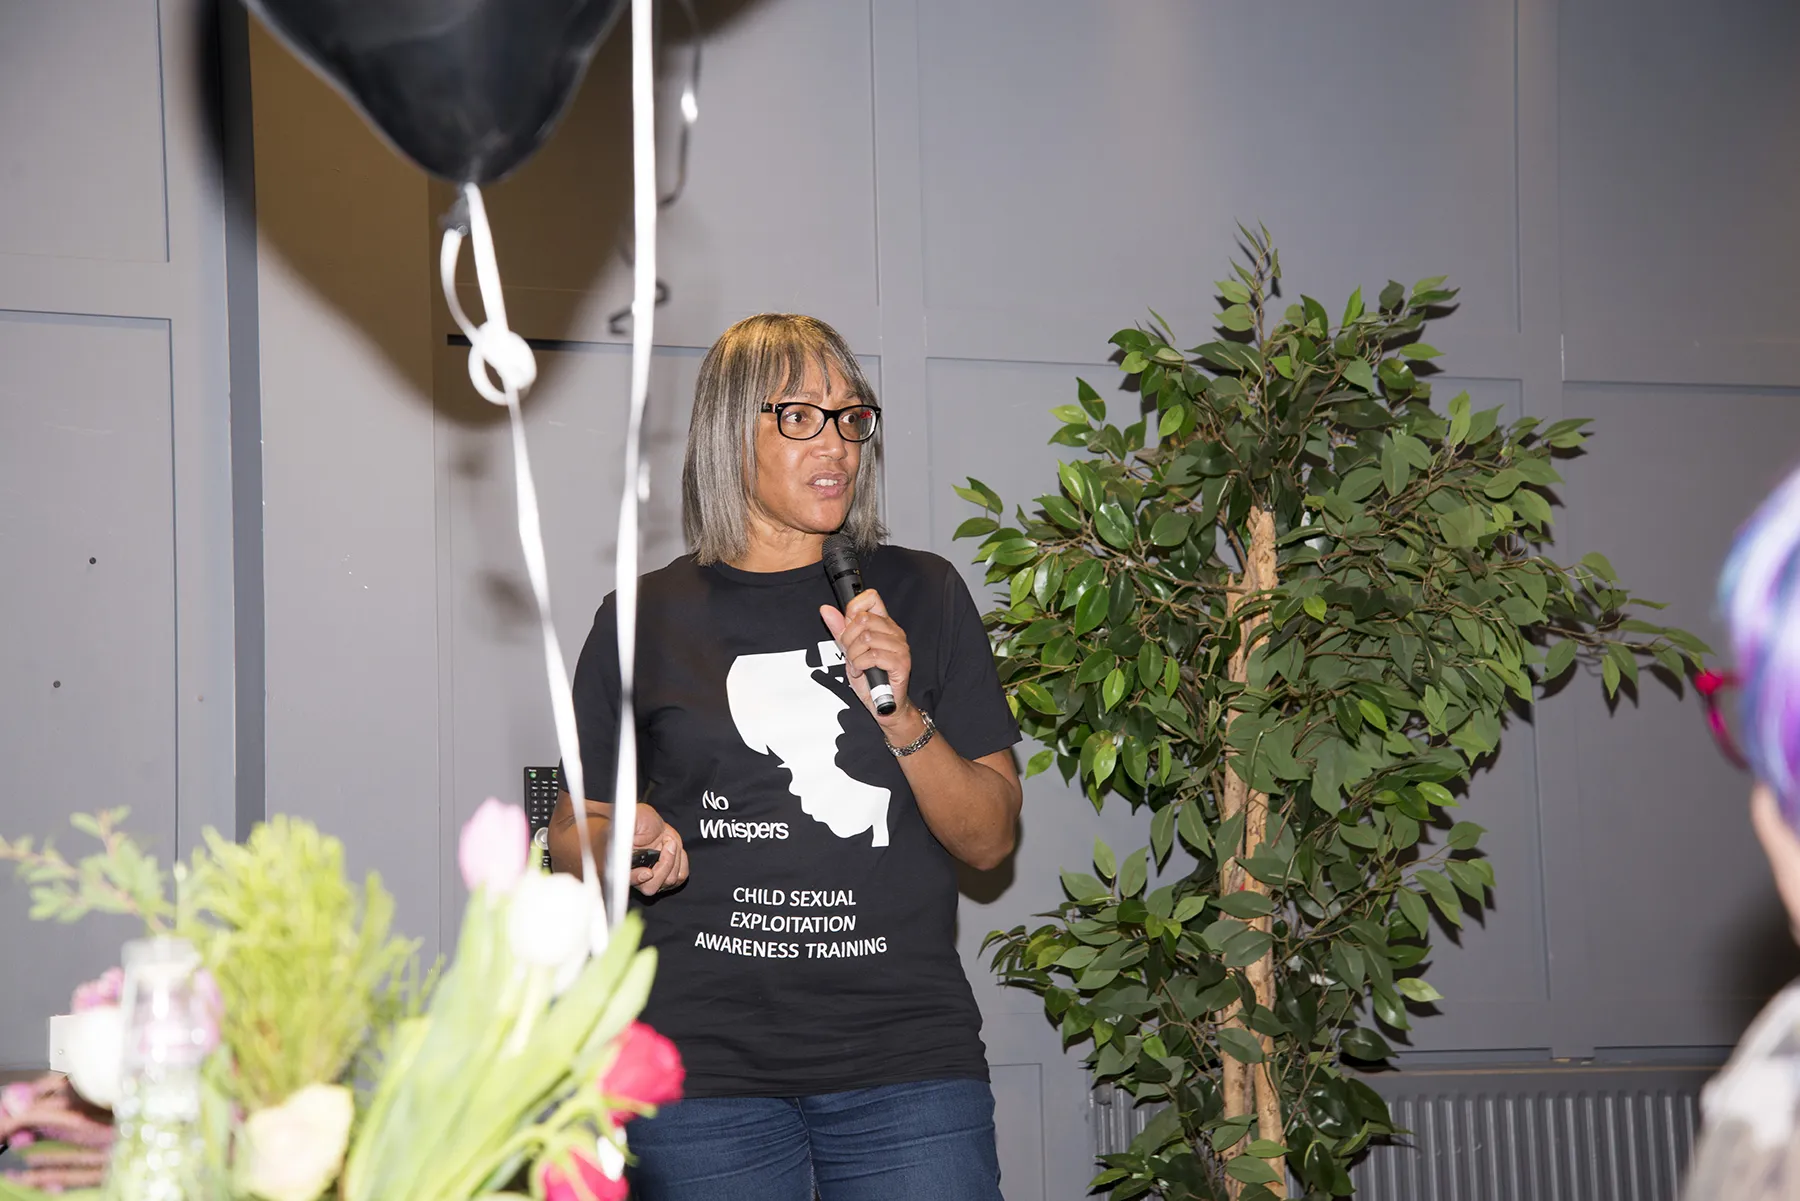 Jackie Williams Presenting at No Whispers birthday Event